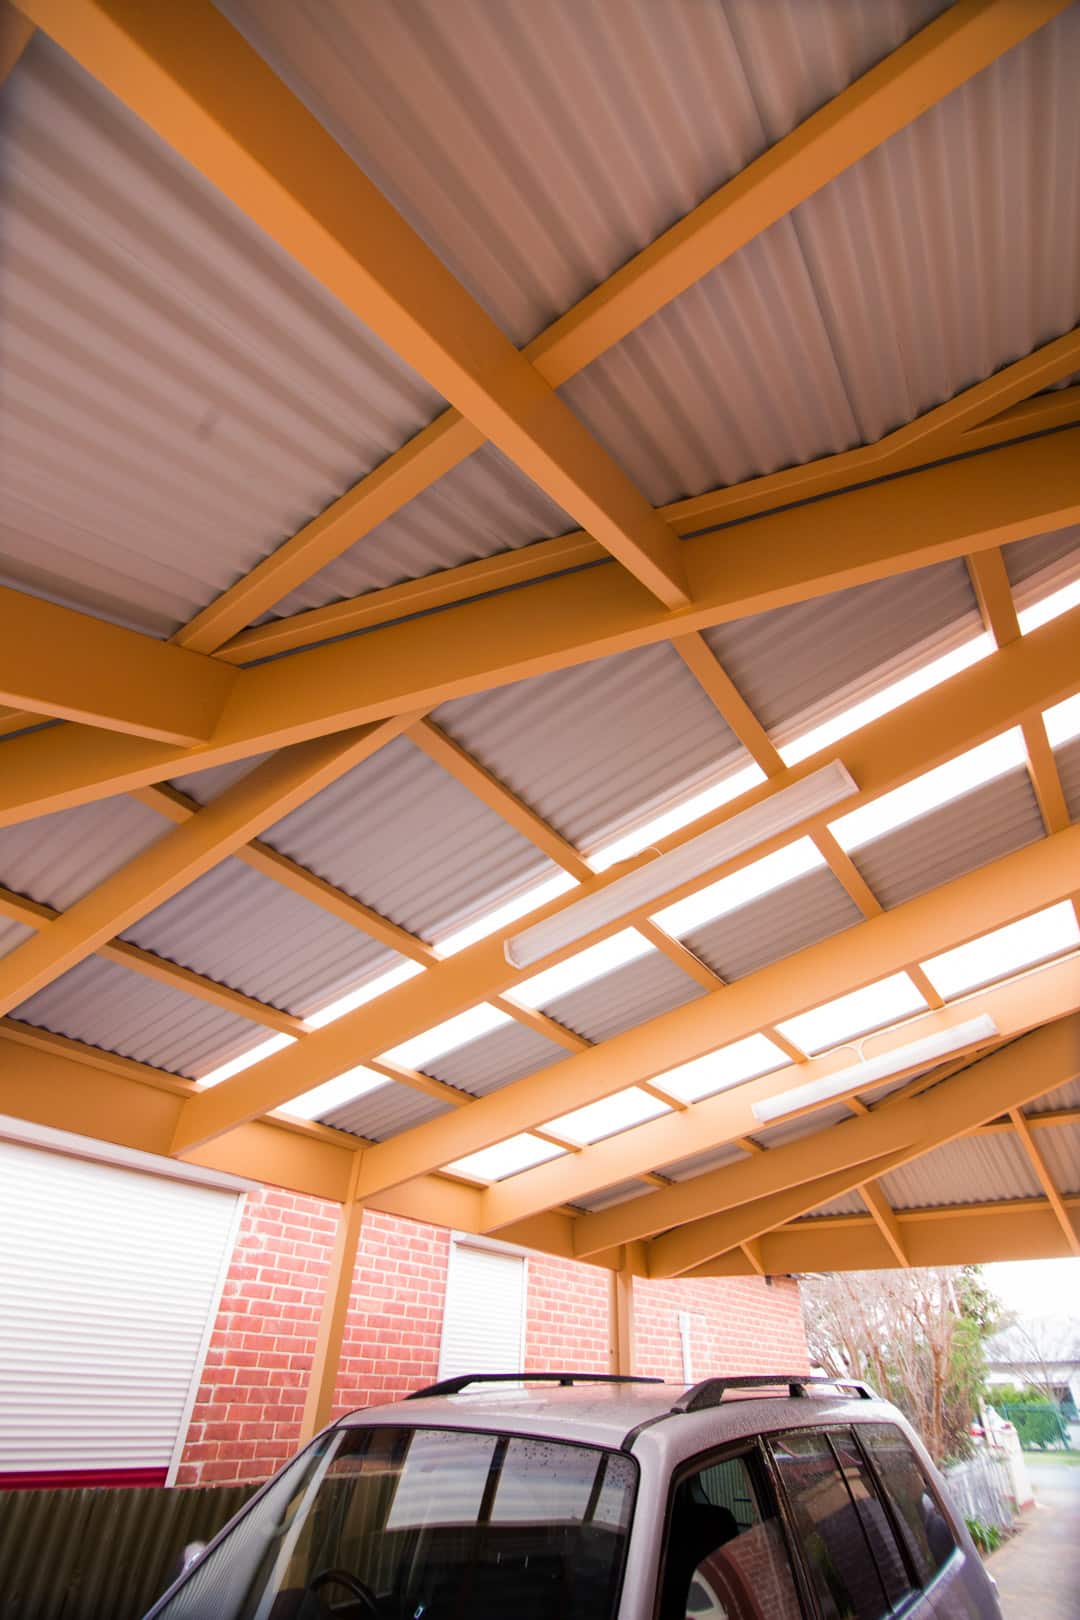 How can a carport help me this summer - Australian Outdoor Living can design a carport to fit in with the style of your home, Australian Outdoor Living